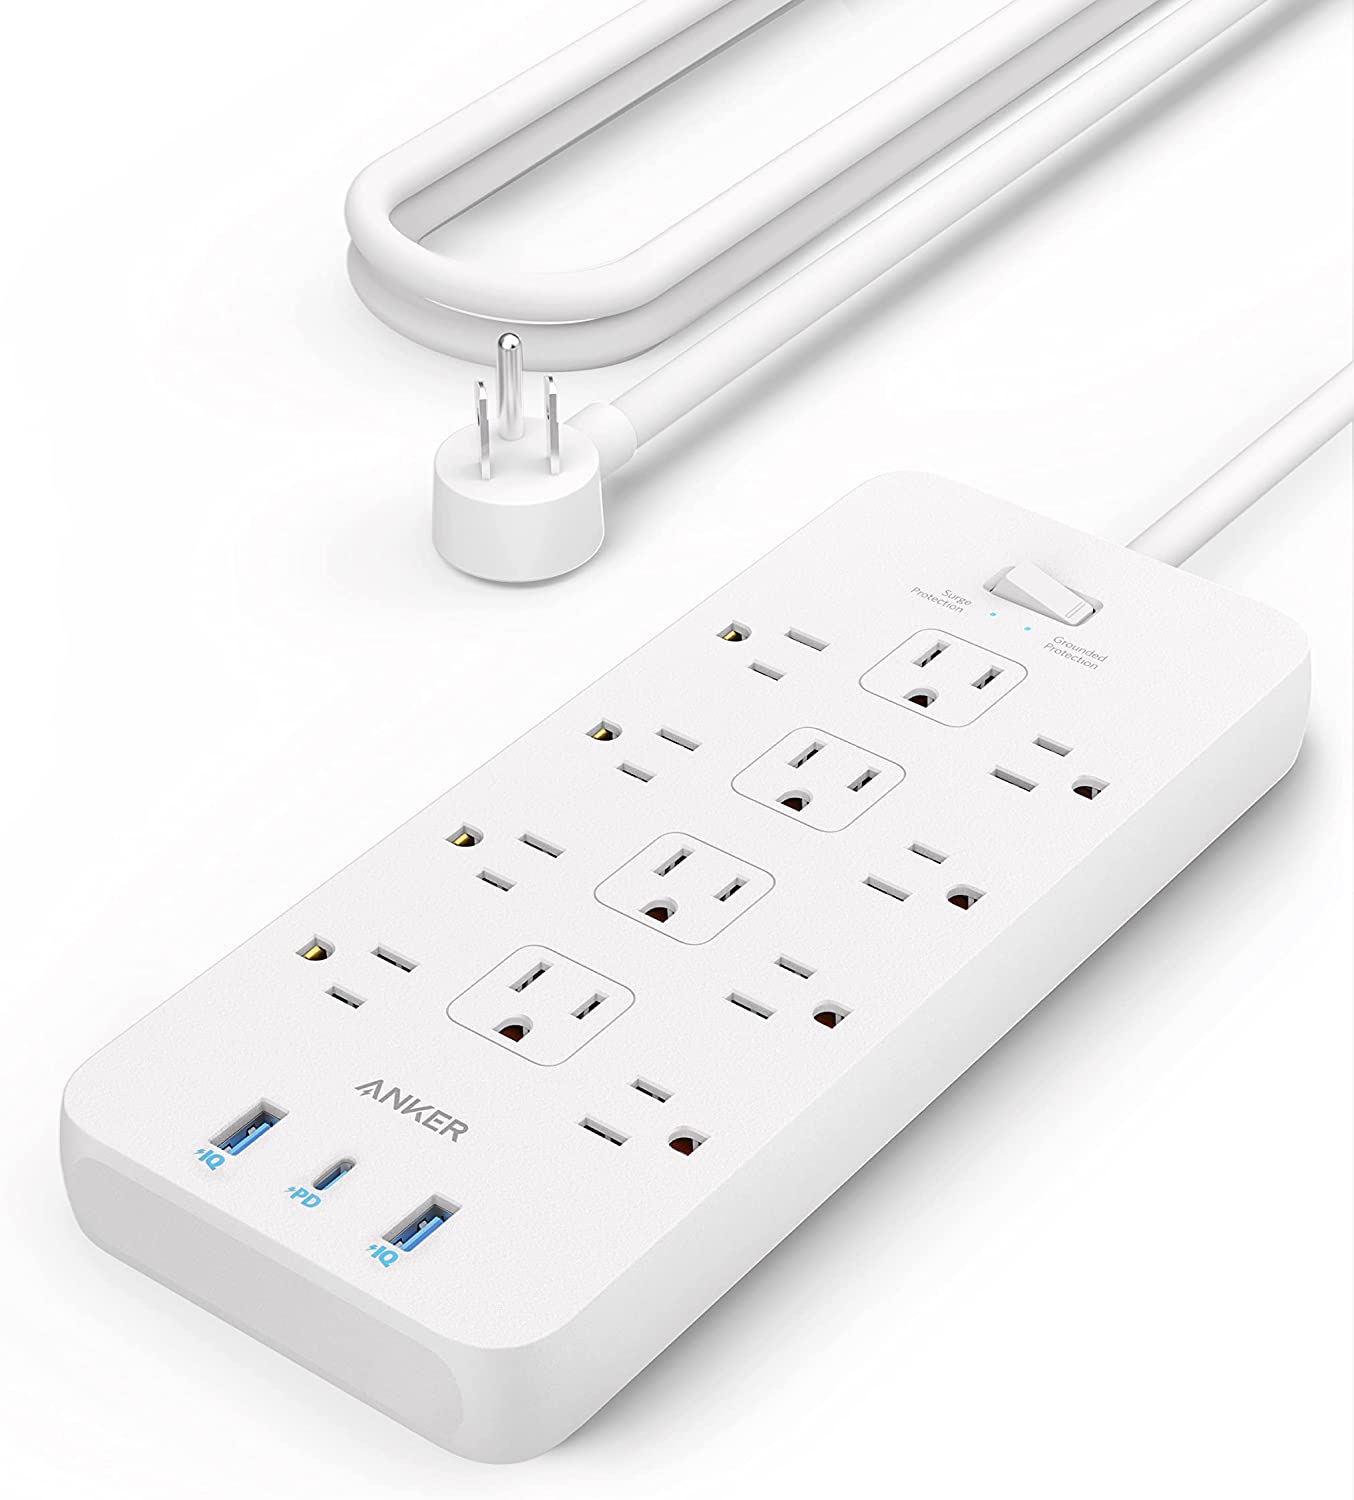 Anker Power Strip 2100J 12-Outlet Surge Protector w/ 2x USB A + 1 USB C Port $25 + Free Shipping $24.99